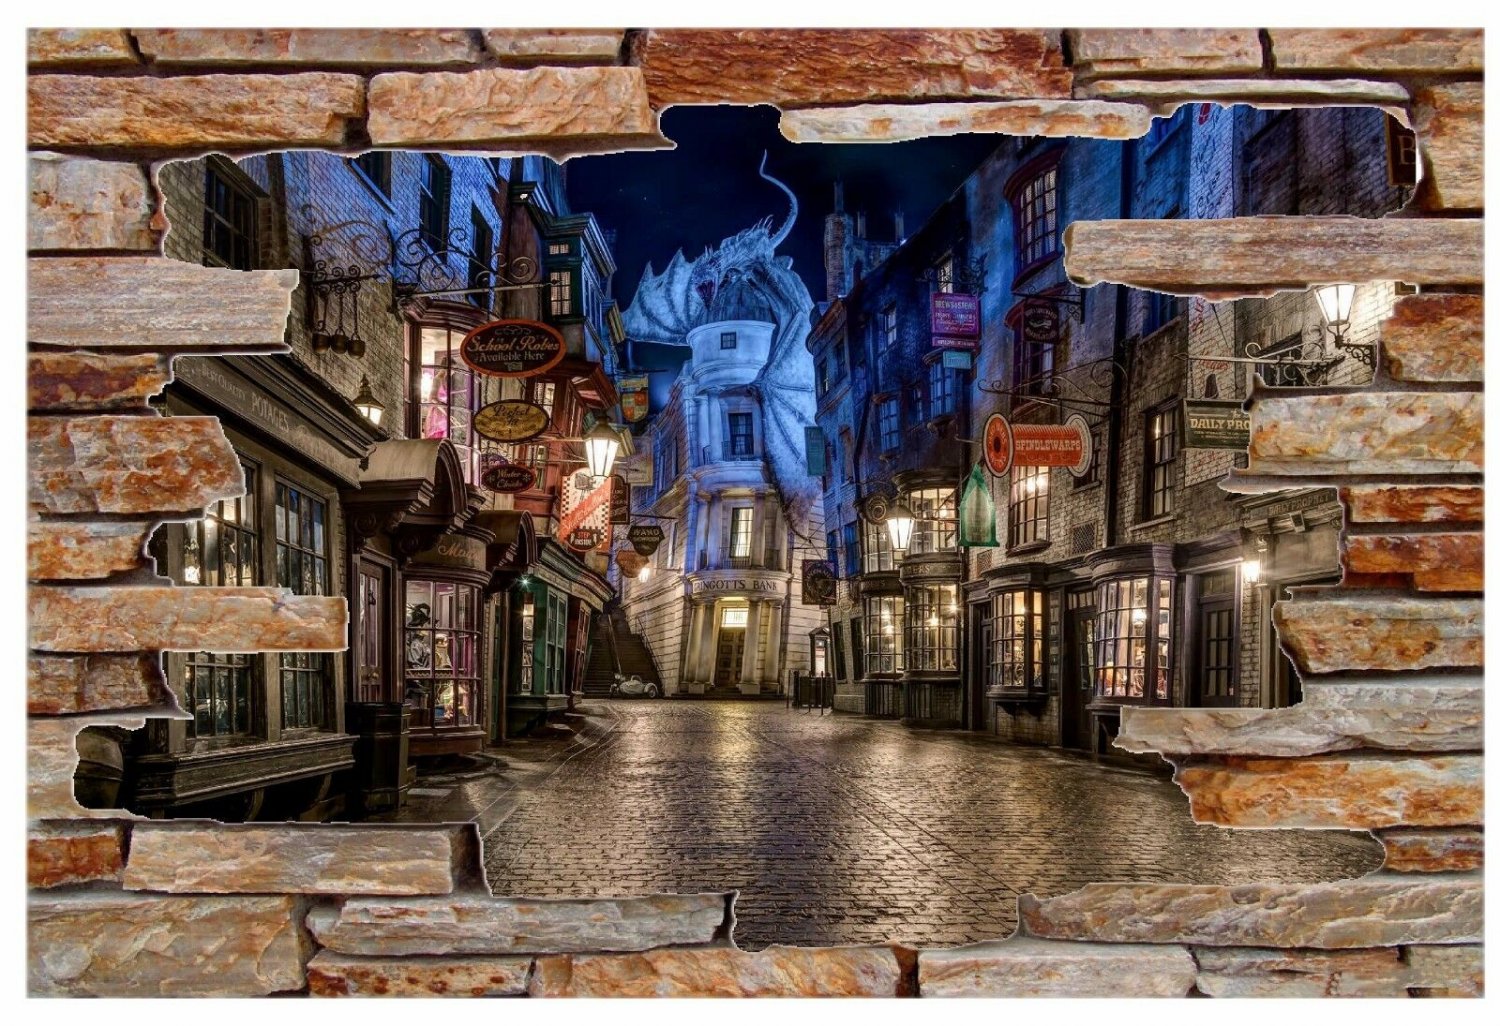 Harry Potter Diagon Alley Rock Wall Decal Graphic Wall Sticker Art Mural.